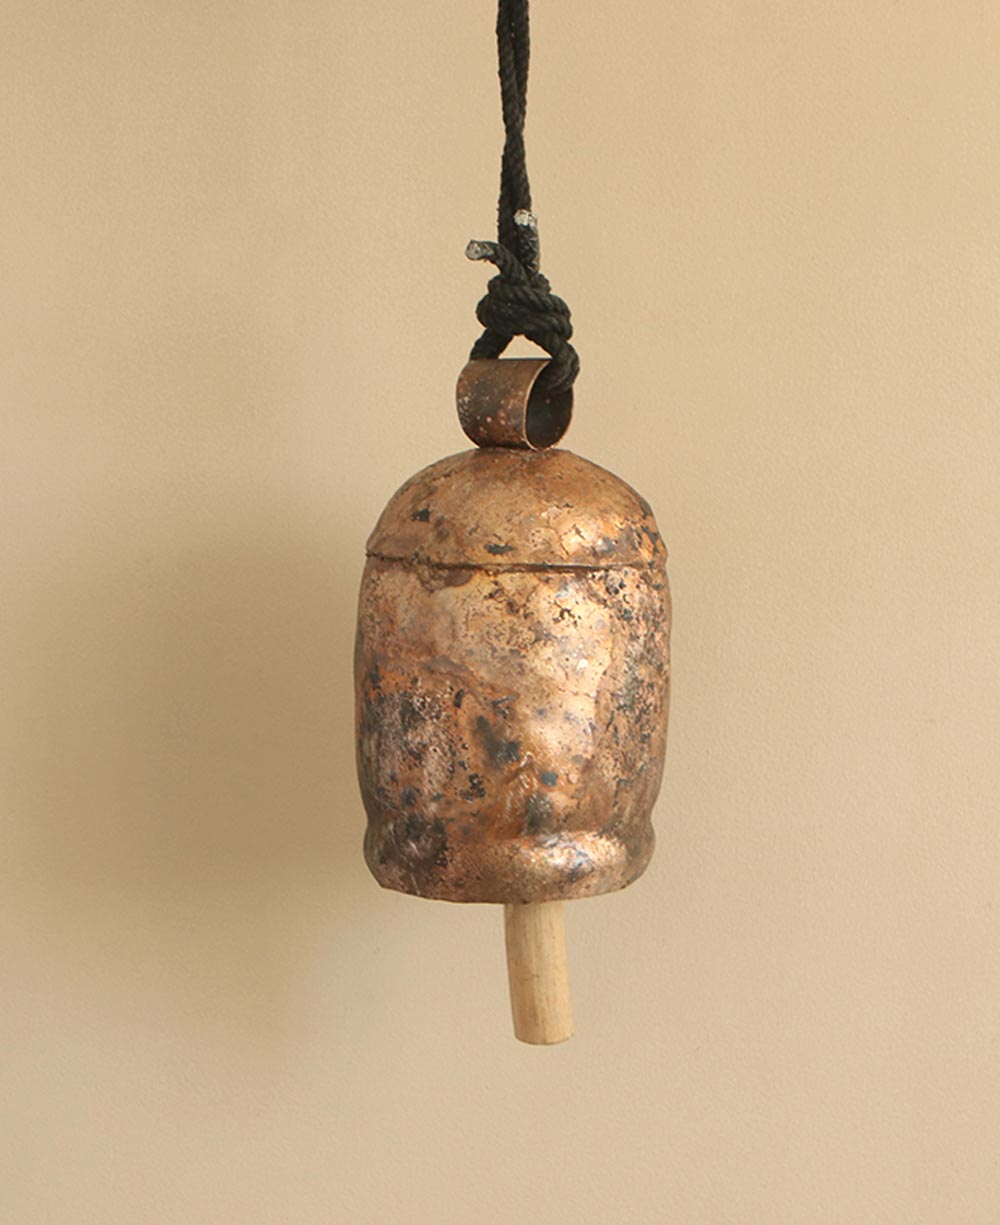 Fair-trade and Handmade Large Decorative Cowbell With a Soothing Tone - Wind Chimes